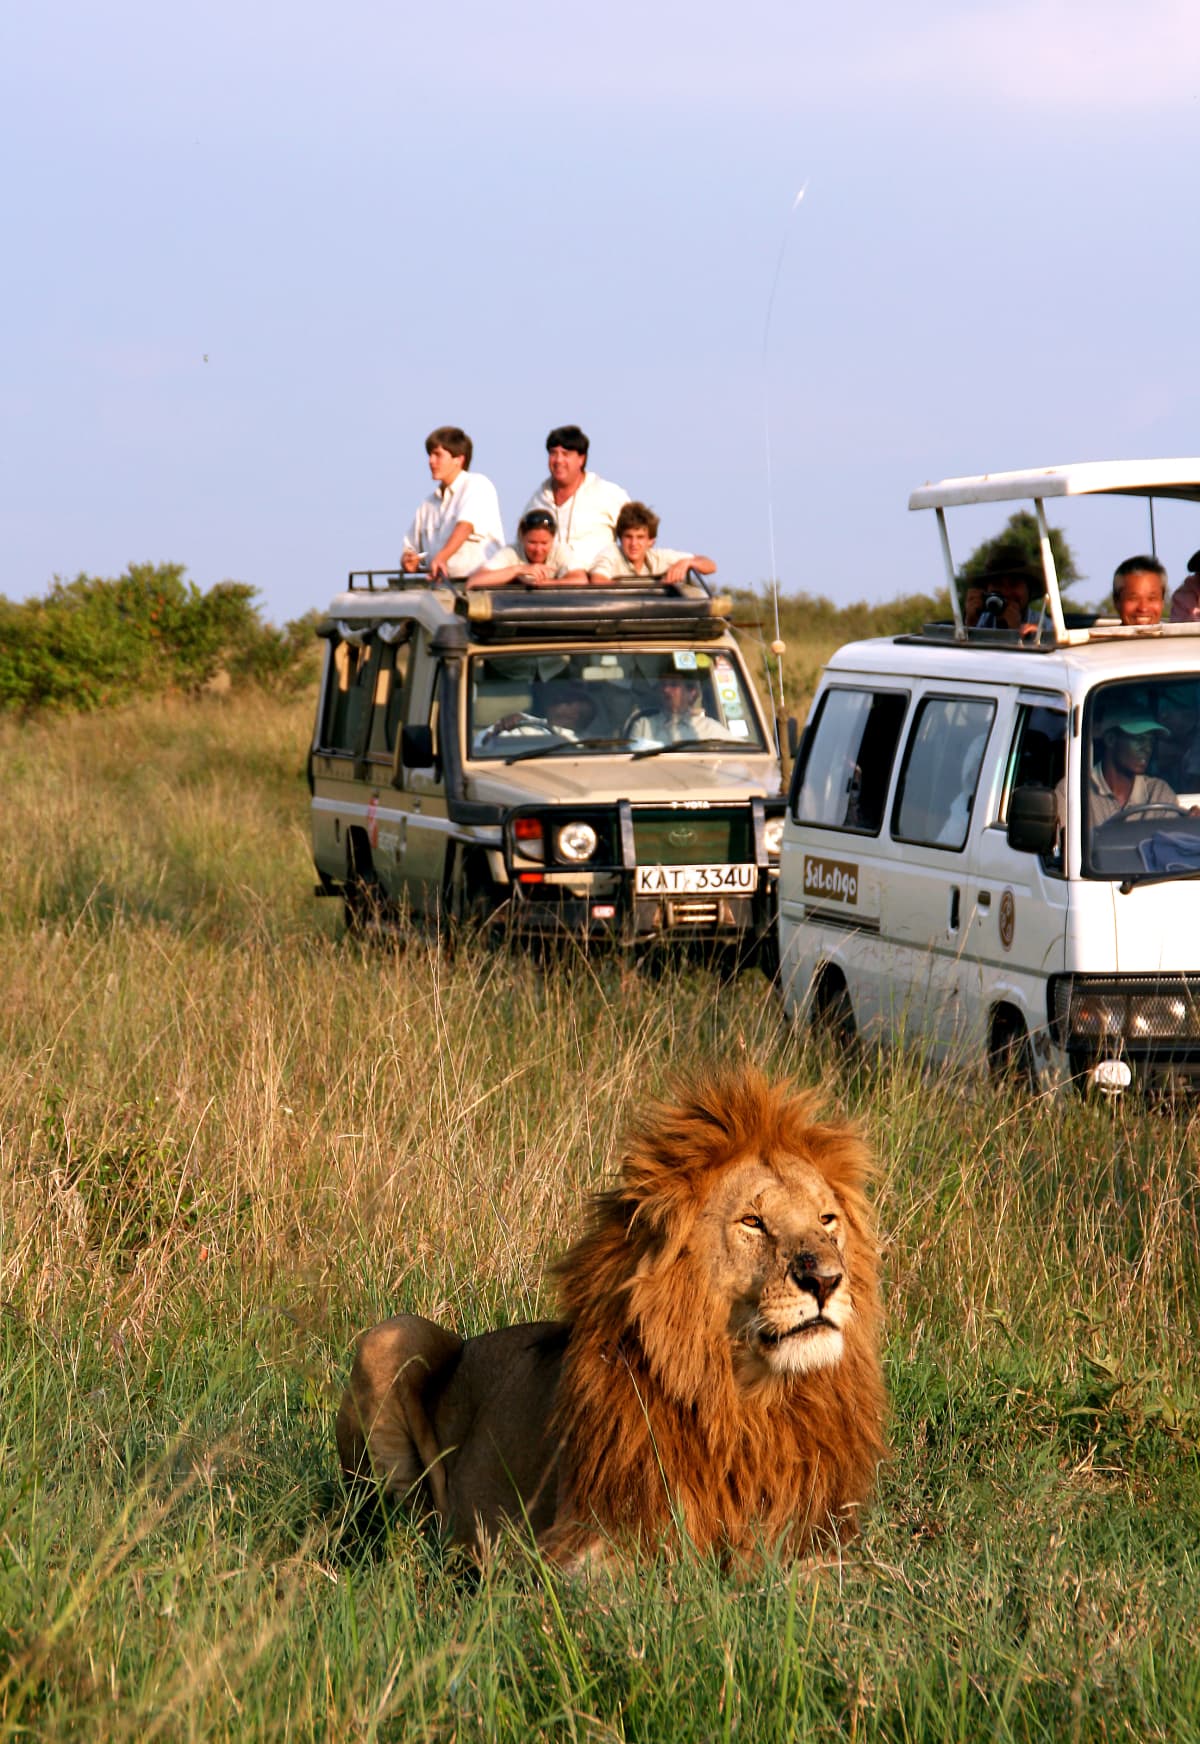 Some tourists in a car looking a lion during a safari.